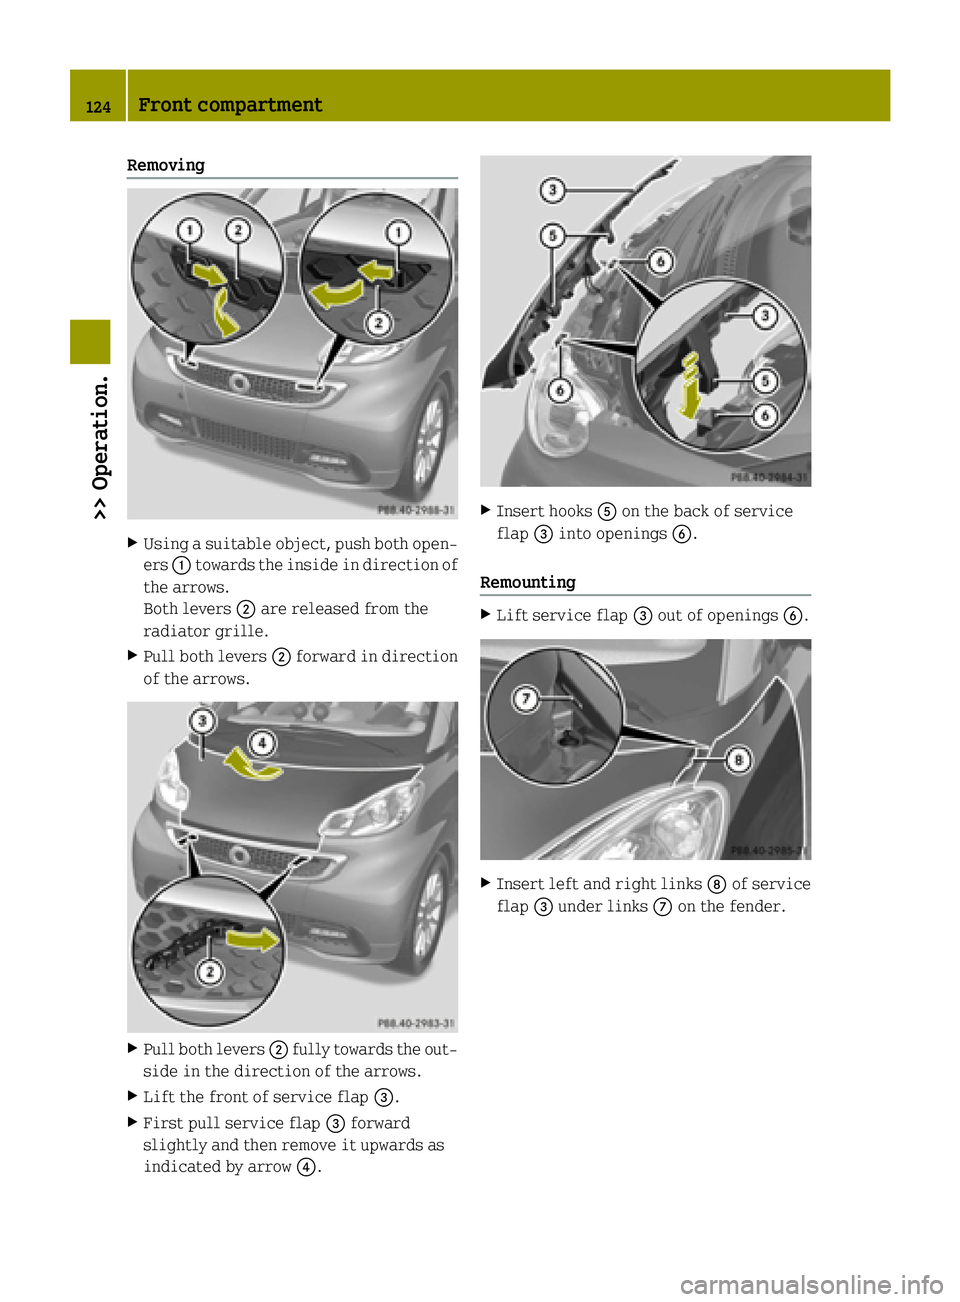 SMART FORTWO COUPE ELECTRIC DRIVE 2015  Owners Manual Removing
X
Using a suitable object, push both open-
ers :towards the inside in direction of
the arrows.
Both levers ;are released from the
radiator grille.
X Pull both levers ;forward in direction
of 